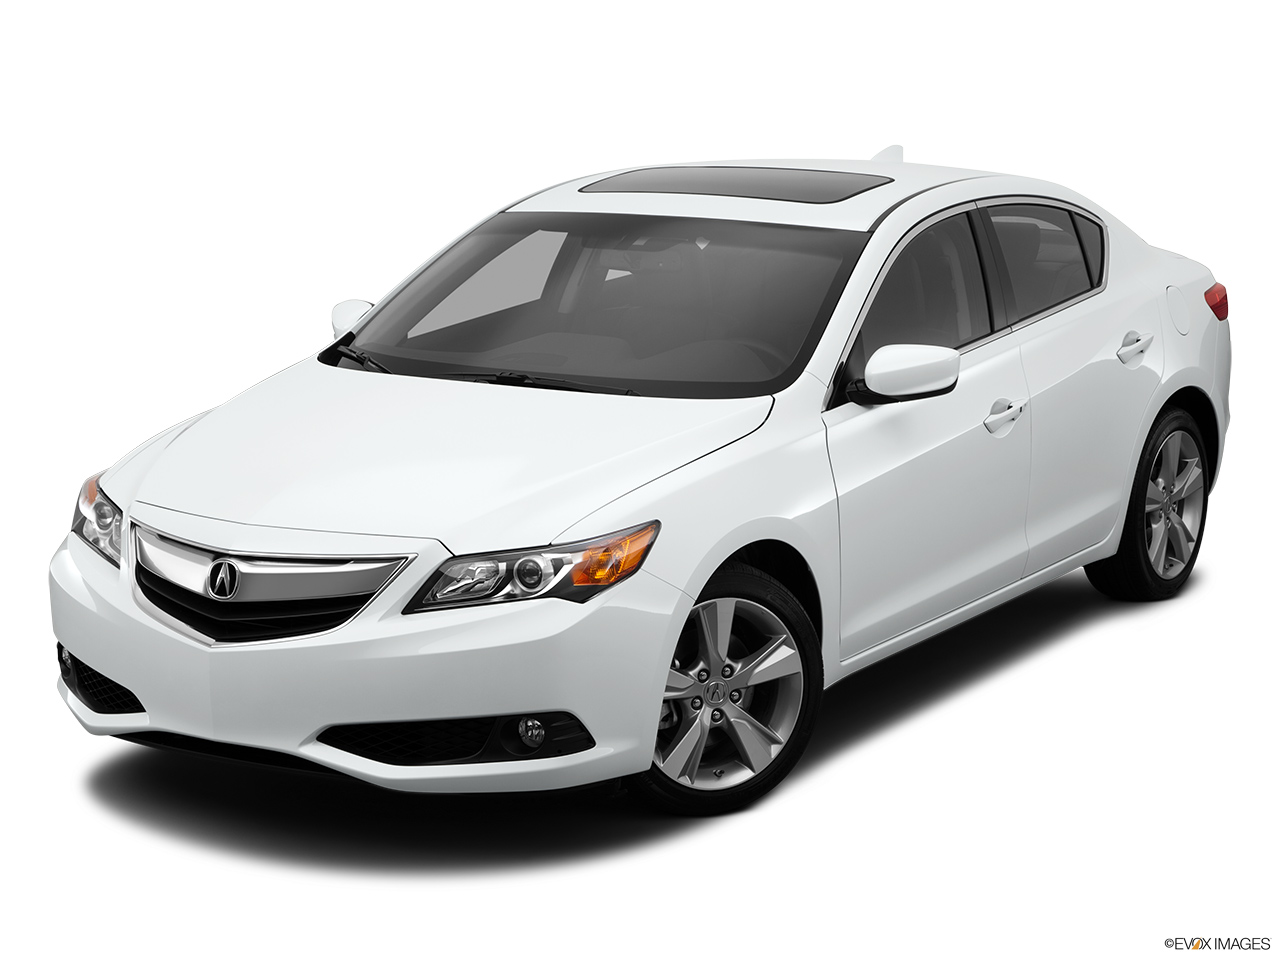 2015 Acura ILX 6-Speed Manual Front angle view. 